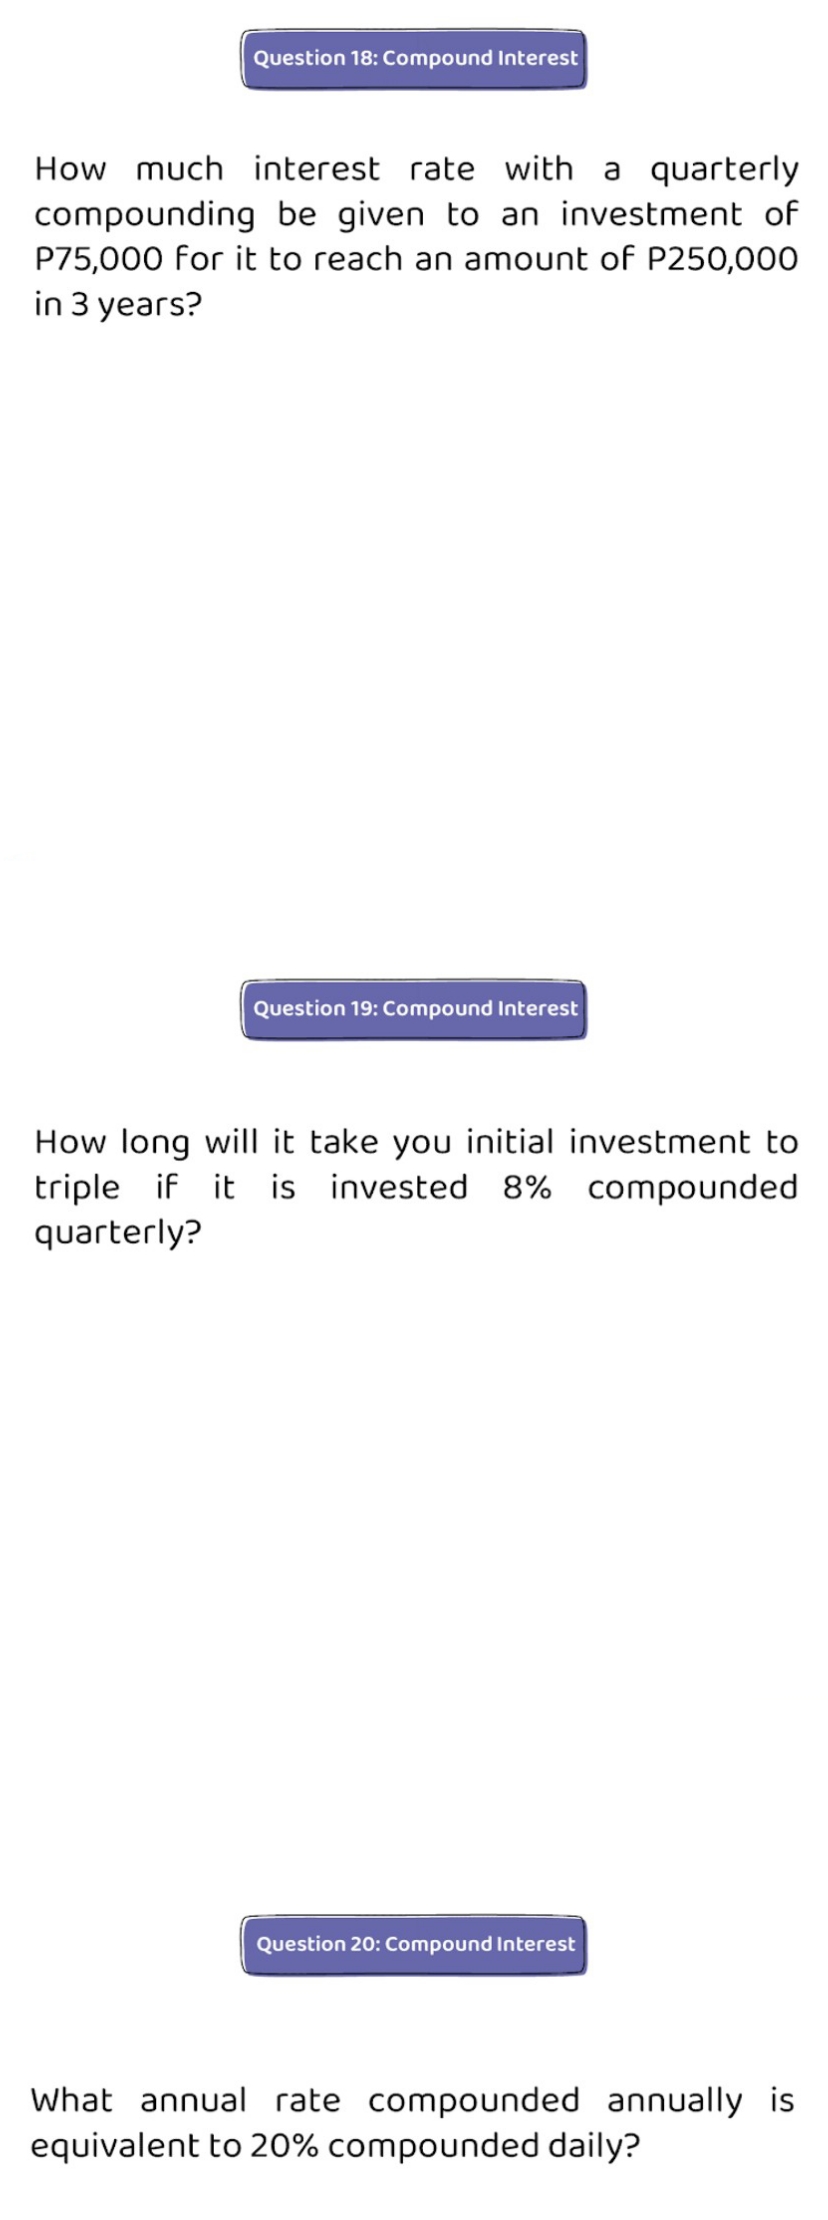 Question 18: Compound Interest
How much interest rate with a quarterly
compounding be given to an investment of
P75,000 for it to reach an amount of P250,000
in 3 years?
Question 19: Compound Interest
How long will it take you initial investment to
triple if it is invested 8% compounded
quarterly?
Question 20: Compound Interest
What annual rate compounded annually is
equivalent to 20% compounded daily?
